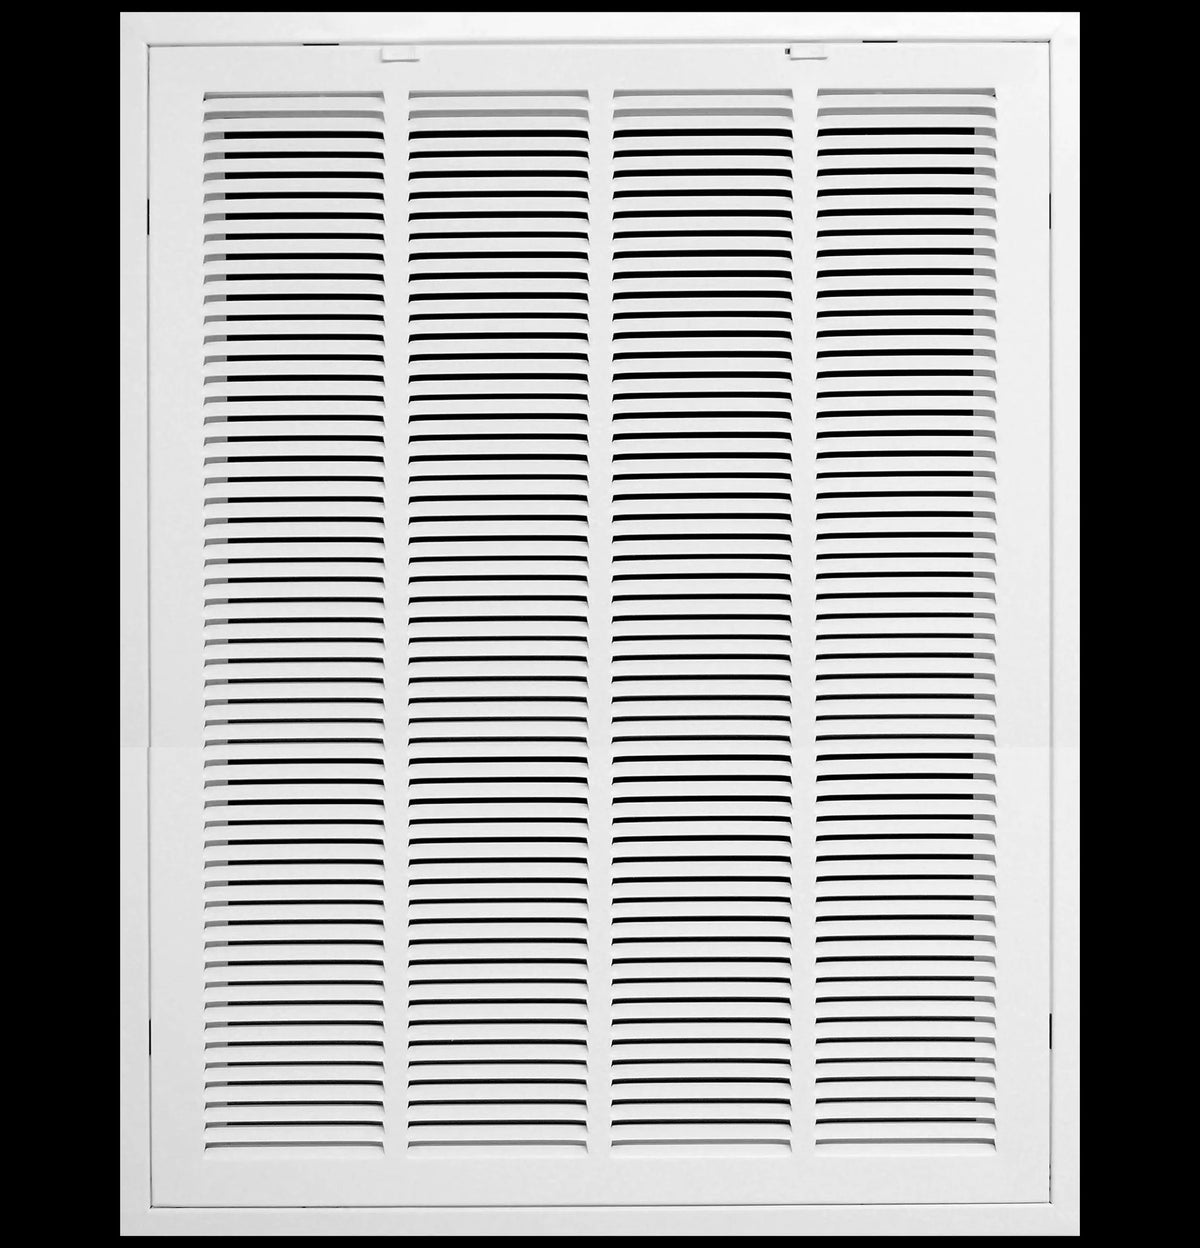 20&quot; X 32&quot; Steel Return Air Filter Grille for 1&quot; Filter - Removable Frame - [Outer Dimensions: 22 5/8&quot; X 34 5/8&quot;]